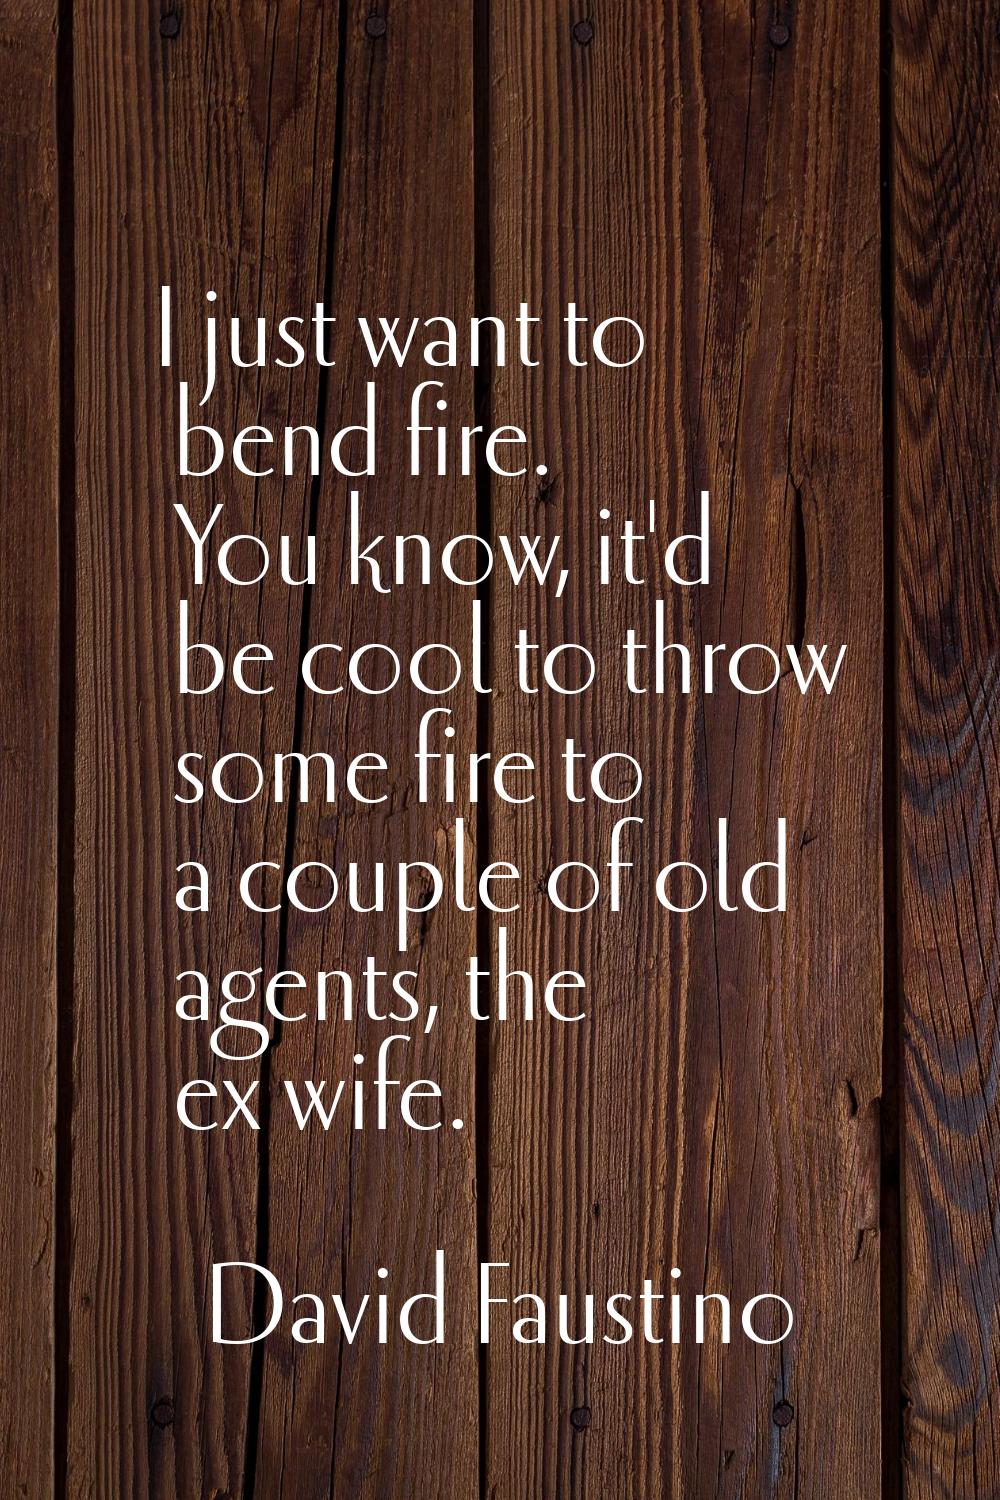 I just want to bend fire. You know, it'd be cool to throw some fire to a couple of old agents, the 